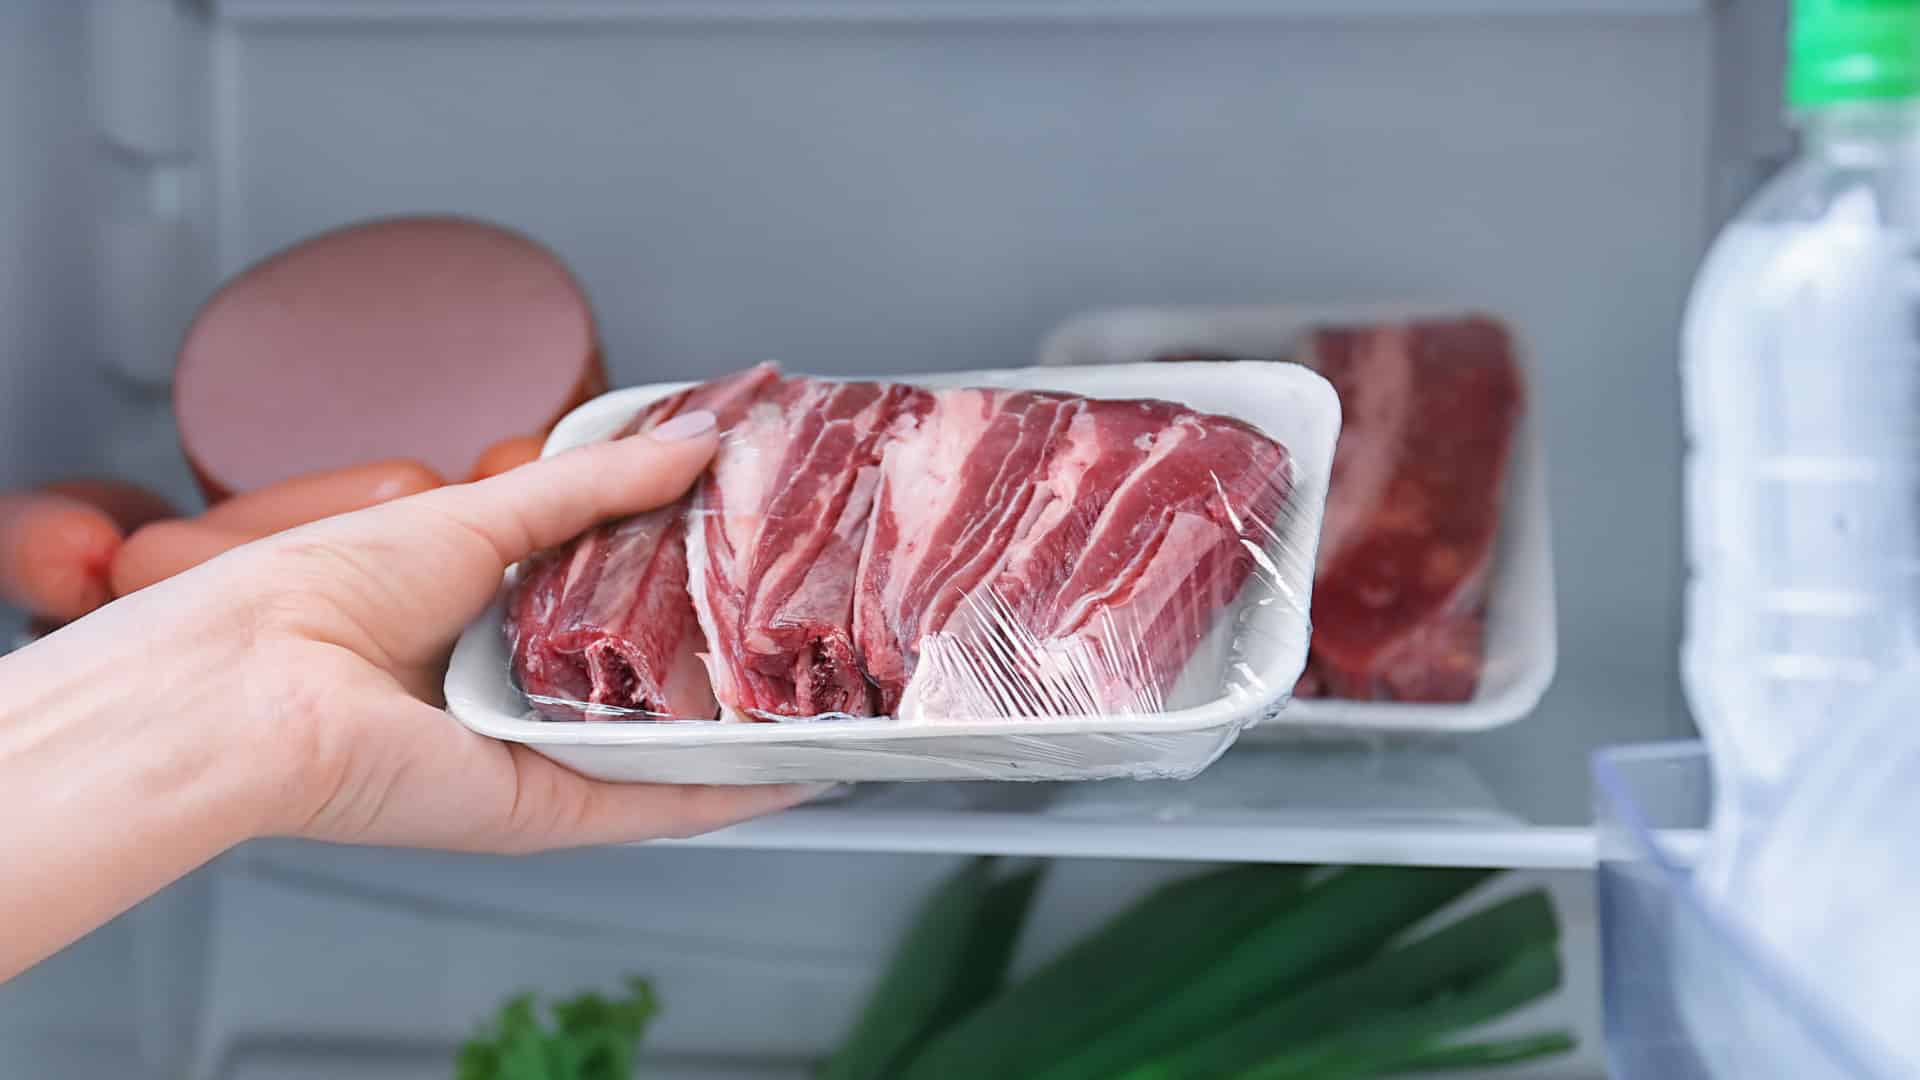 Featured image for “How To Defrost Meat In The Refrigerator”